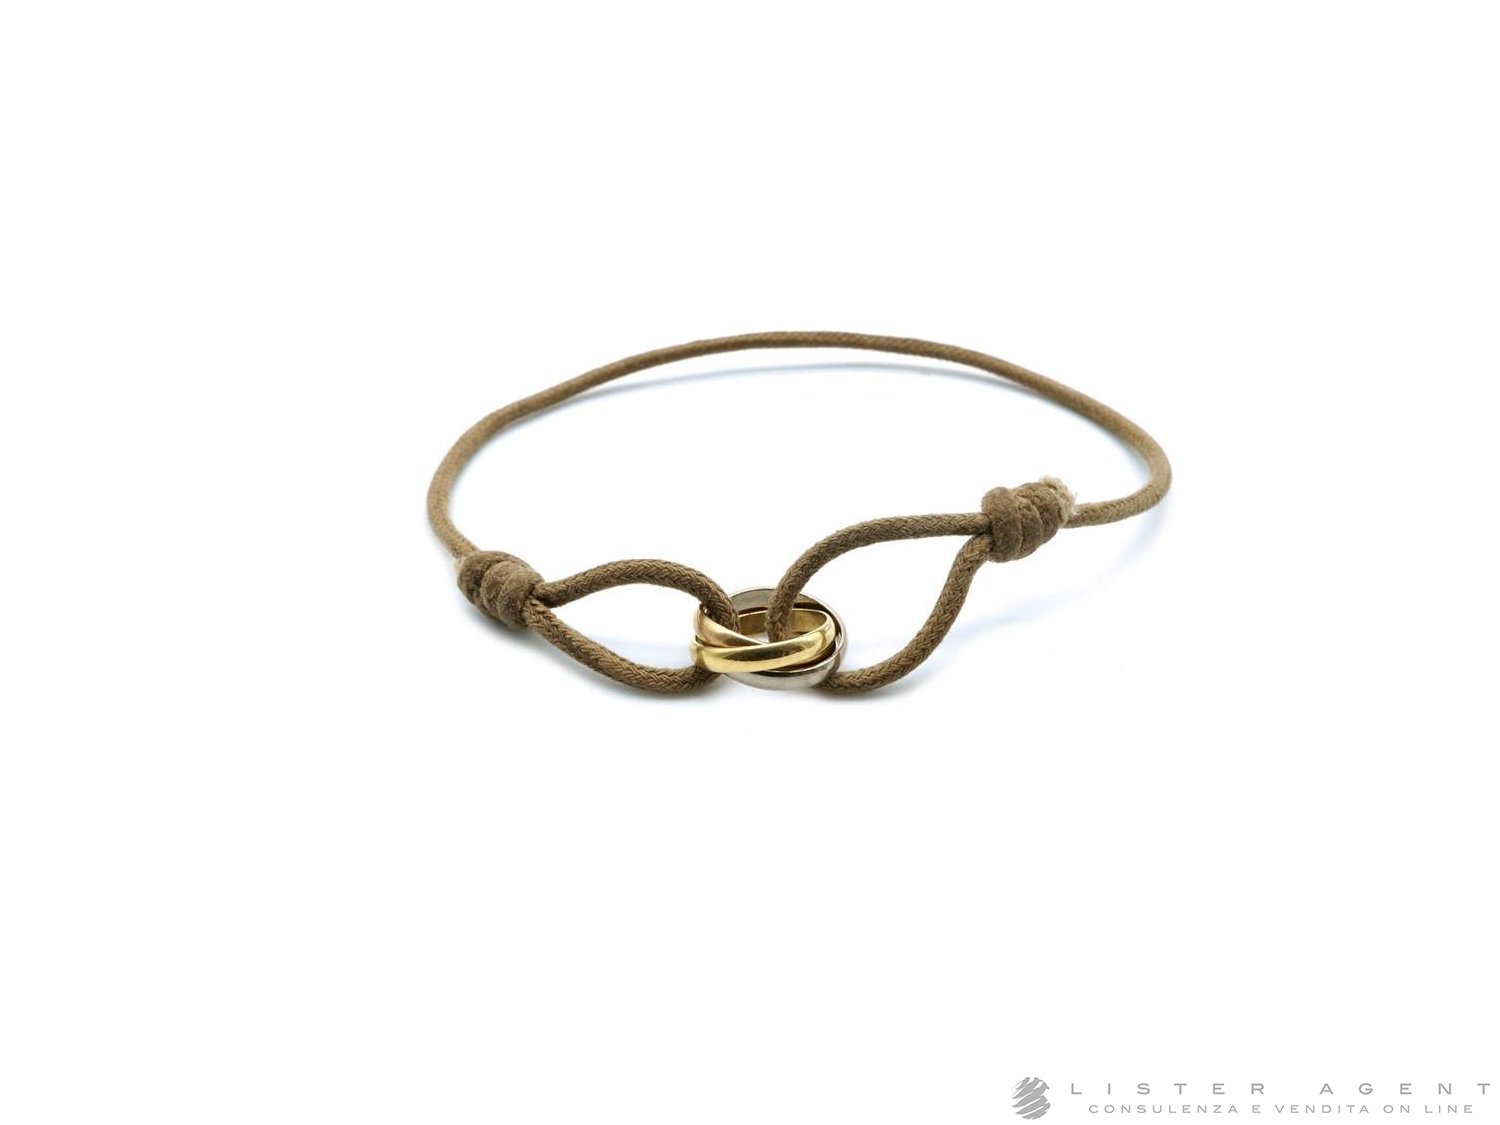 CRB6016700 - Trinity bracelet - White gold, yellow gold, rose gold